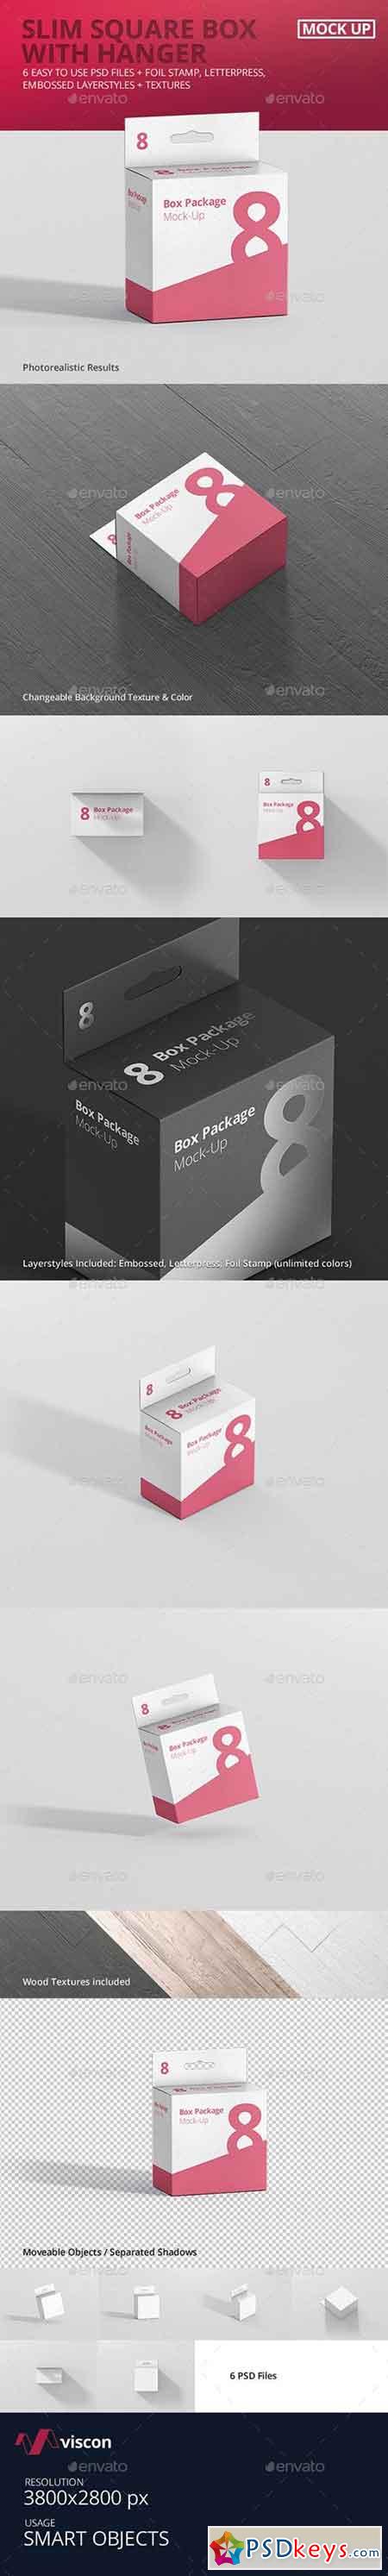 Package Box Mockup - Slim Square with Hanger 18797389